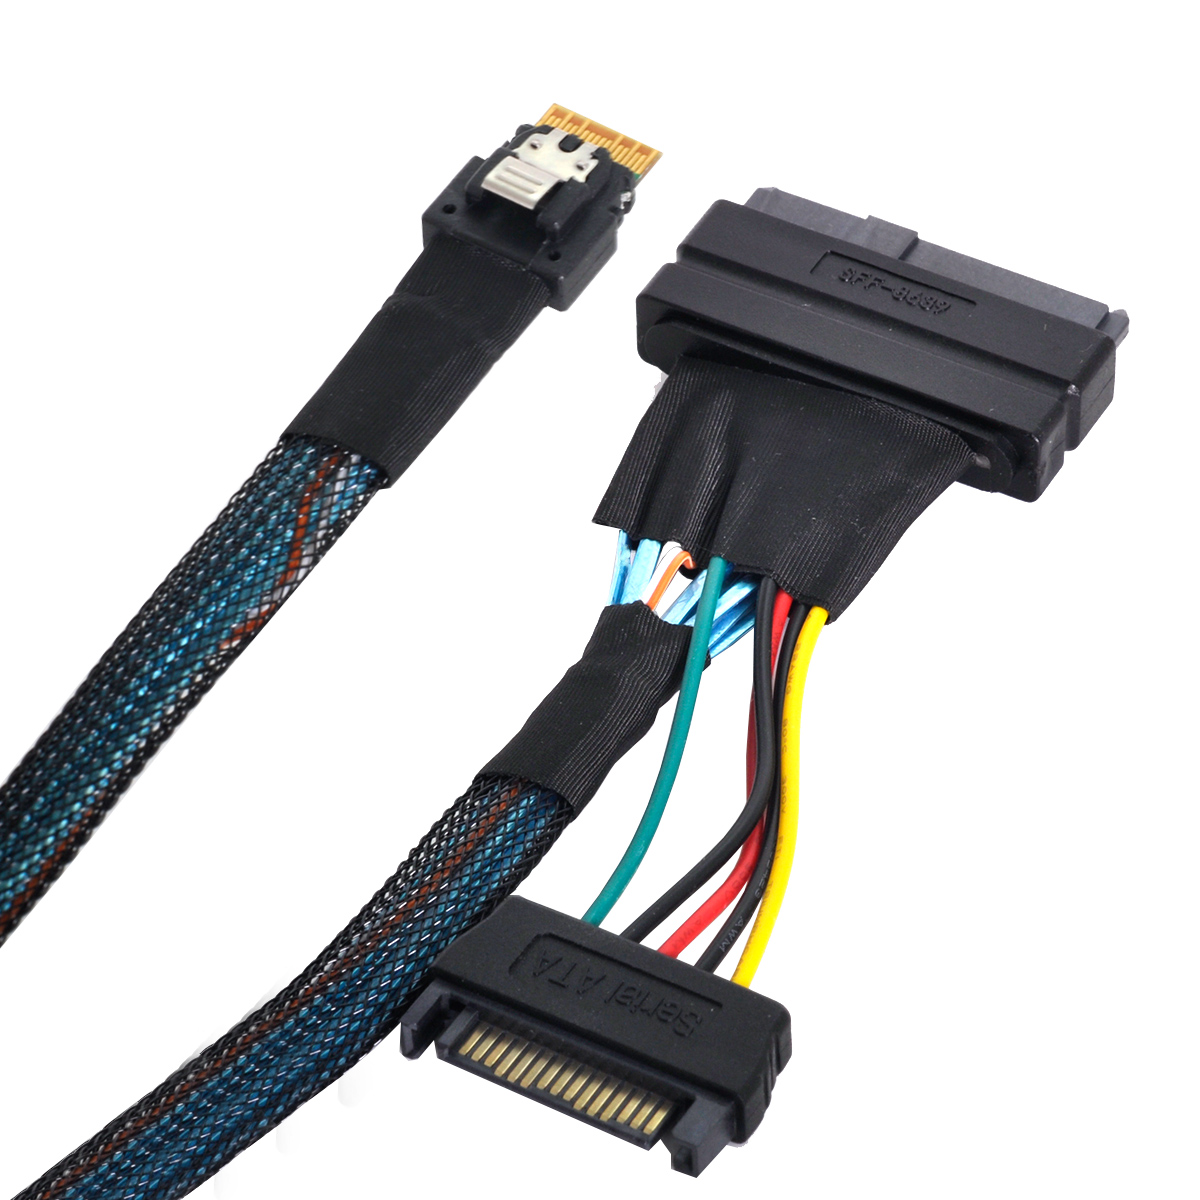 CableCreation Slim SAS SFF-8654 4i Straight to SFF-8639 U.2 Cable Compatible Intel SSD 750 SFF-8654 to SFF-8639 Cable p3600 p3700 U.2 1.5 FT/0.5M 